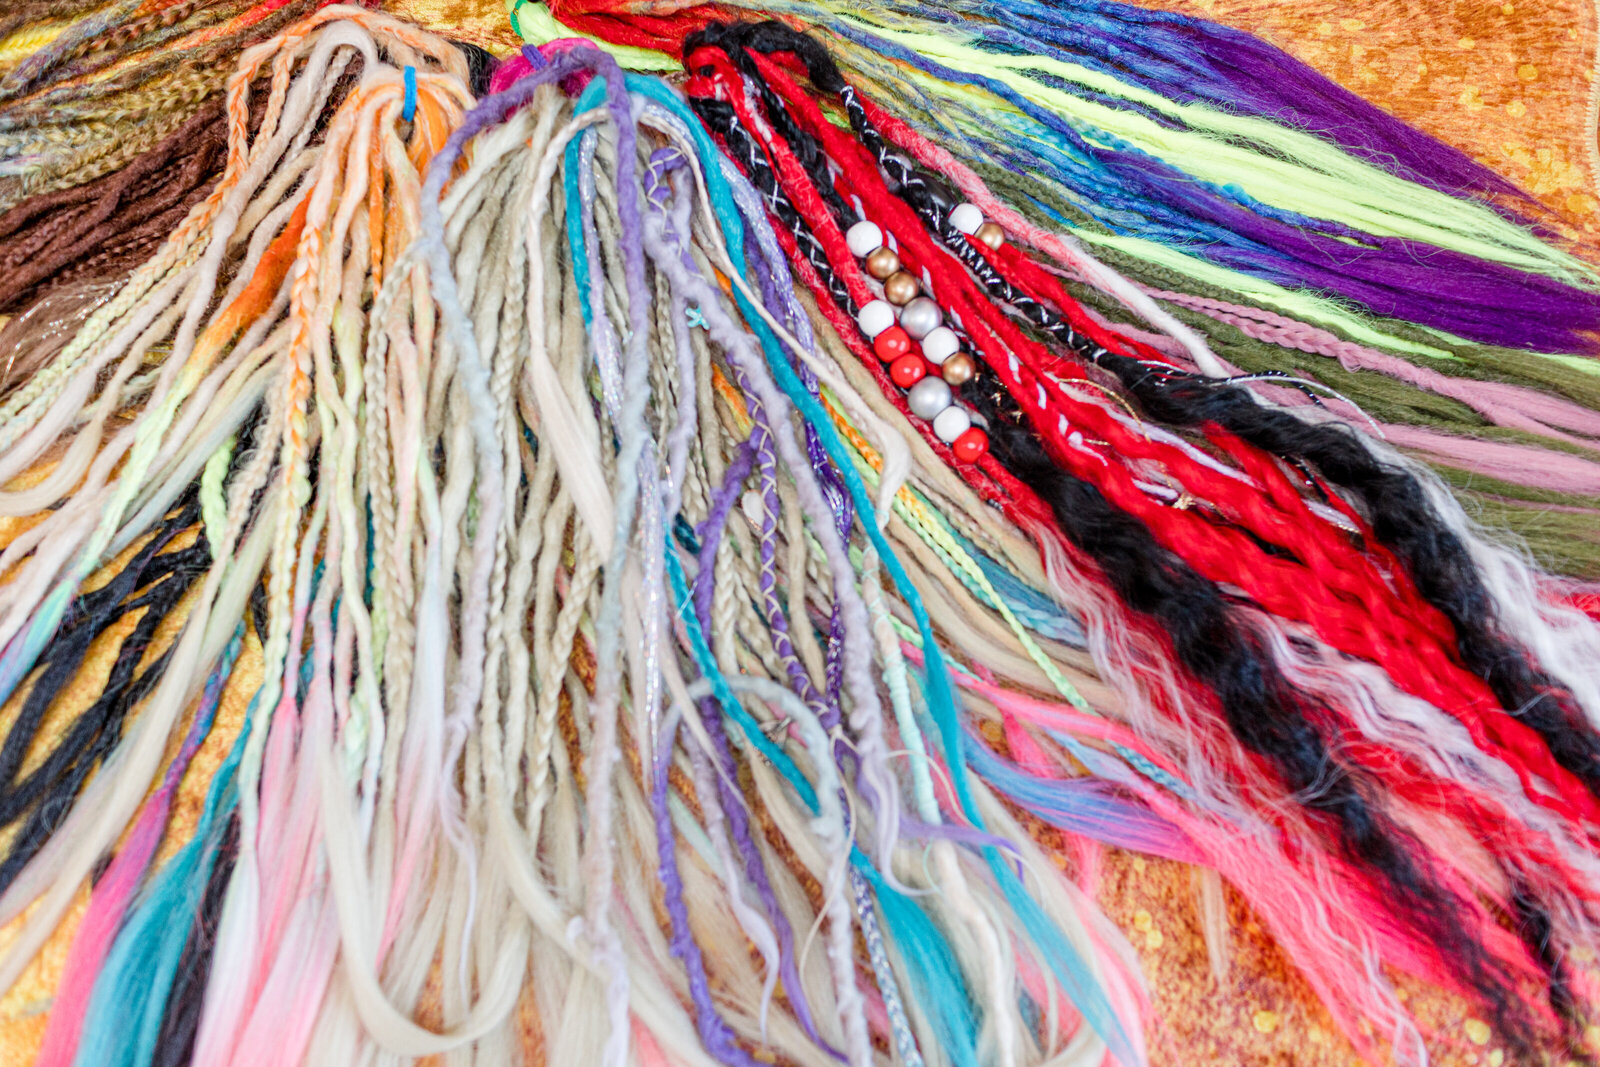 Find the perfect accessories for your dreadlocks, including clips, pins, and hair ties, at Let Me Live Locs - your one-stop shop for all things dreadlocks.